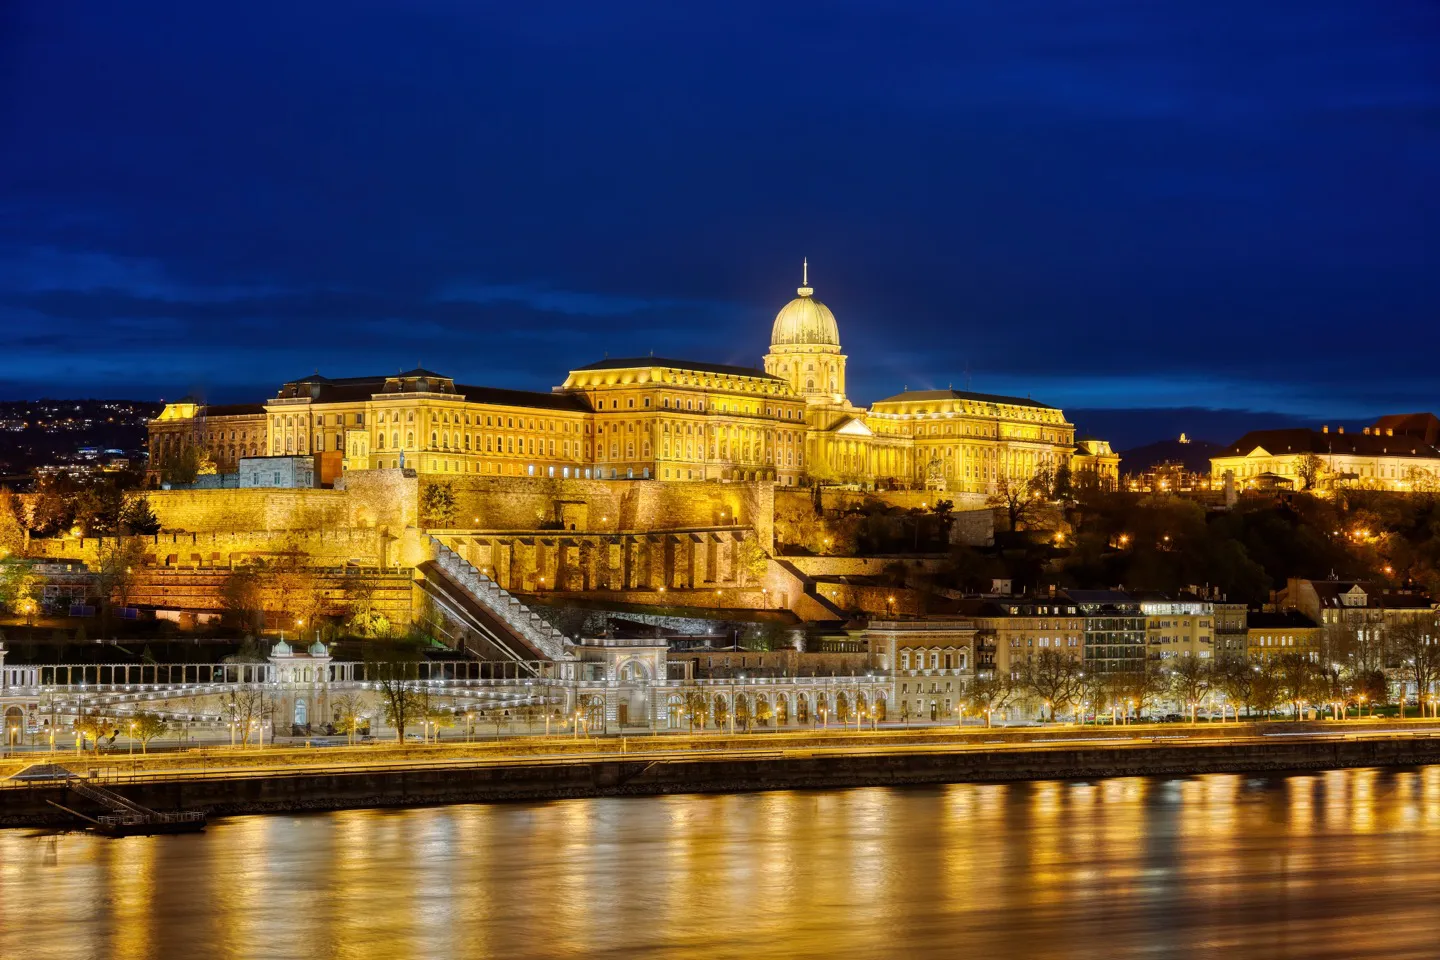 Stay at the stunning Matild Palace in Budapest on a luxury vacation package